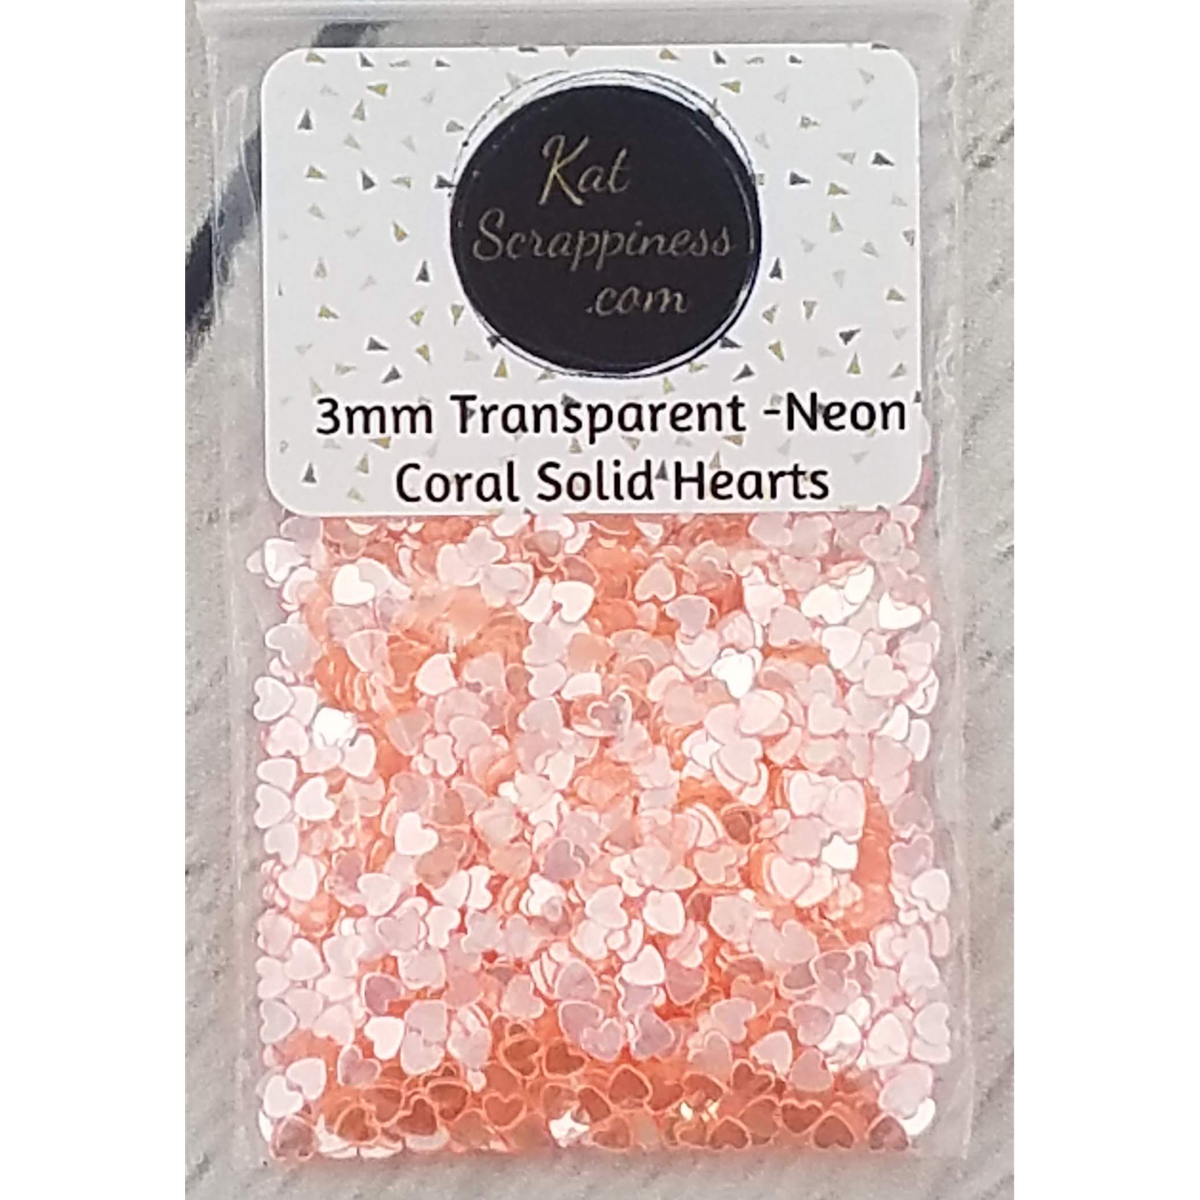 3mm Transparent Neon Coral Solid Heart Sequins - Kat Scrappiness